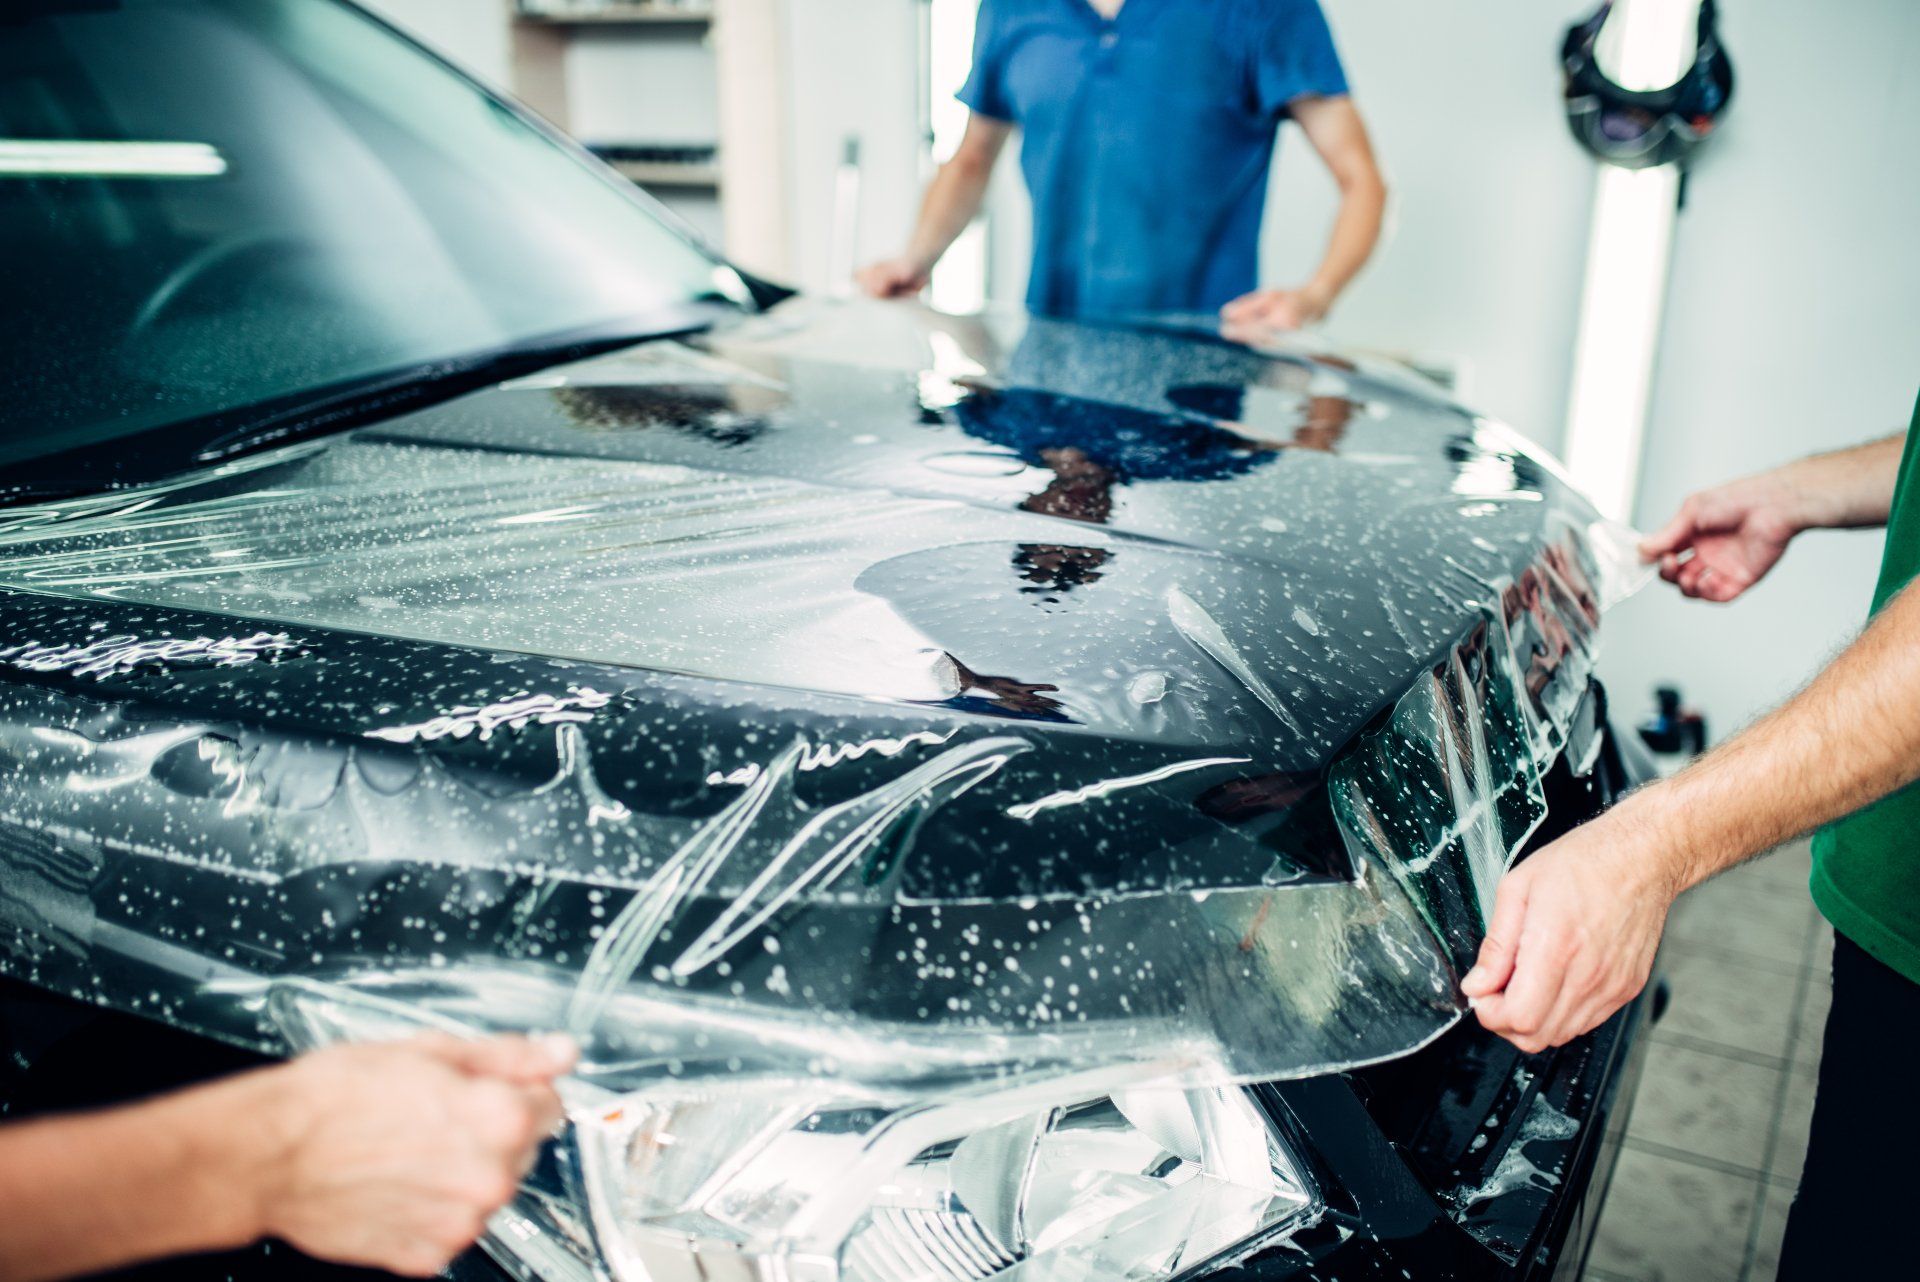 6 Benefits of Clear Bra Paint Protection for Your Car